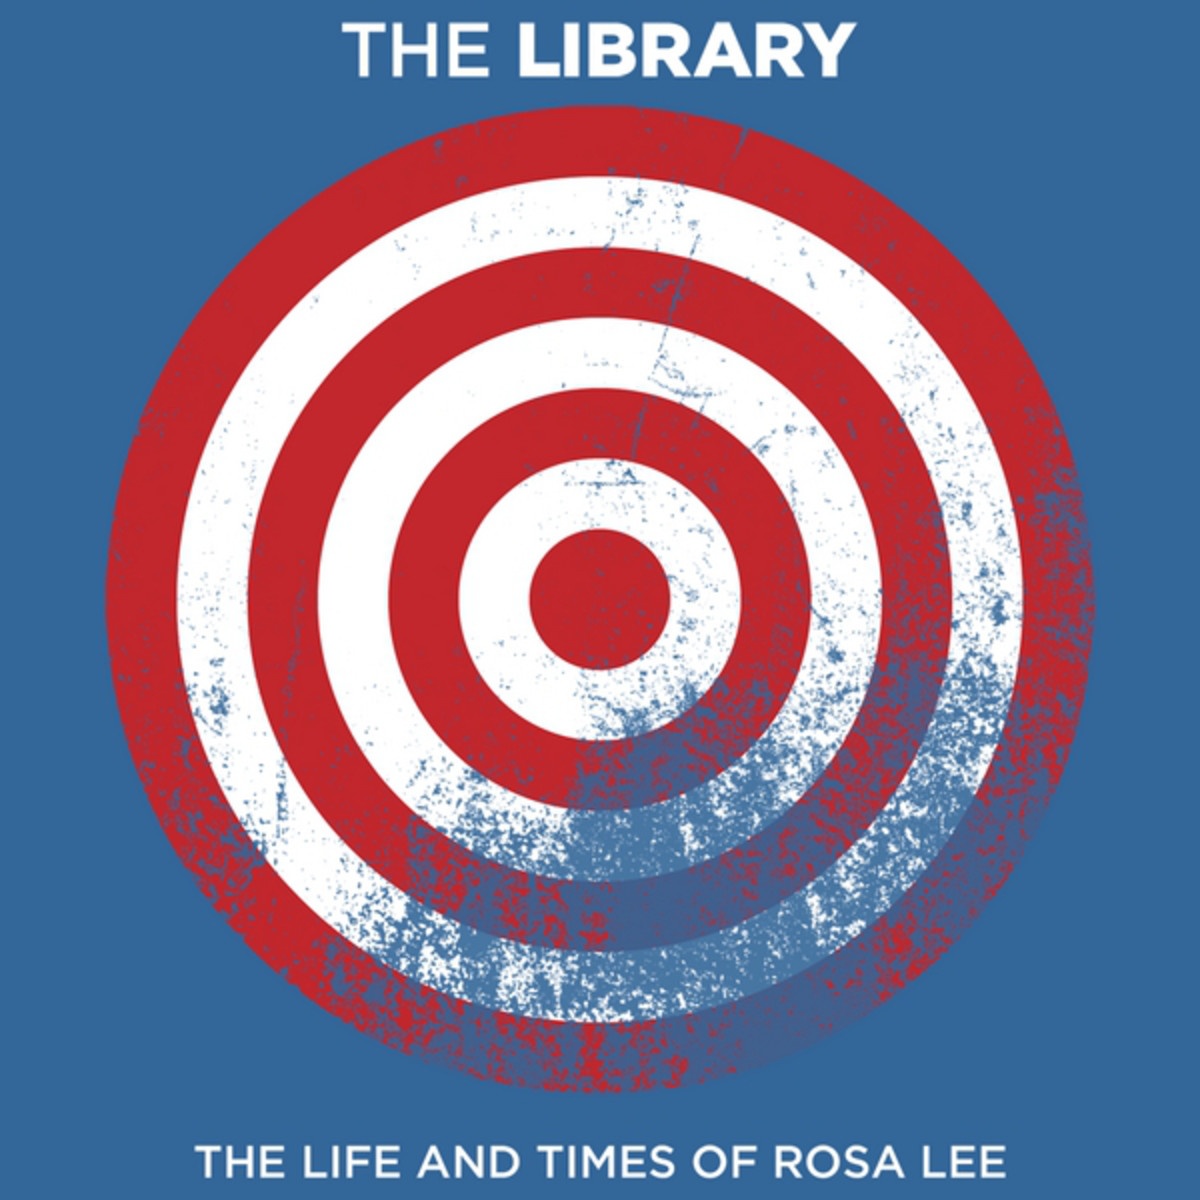 The Life and Times of Rosa Lee